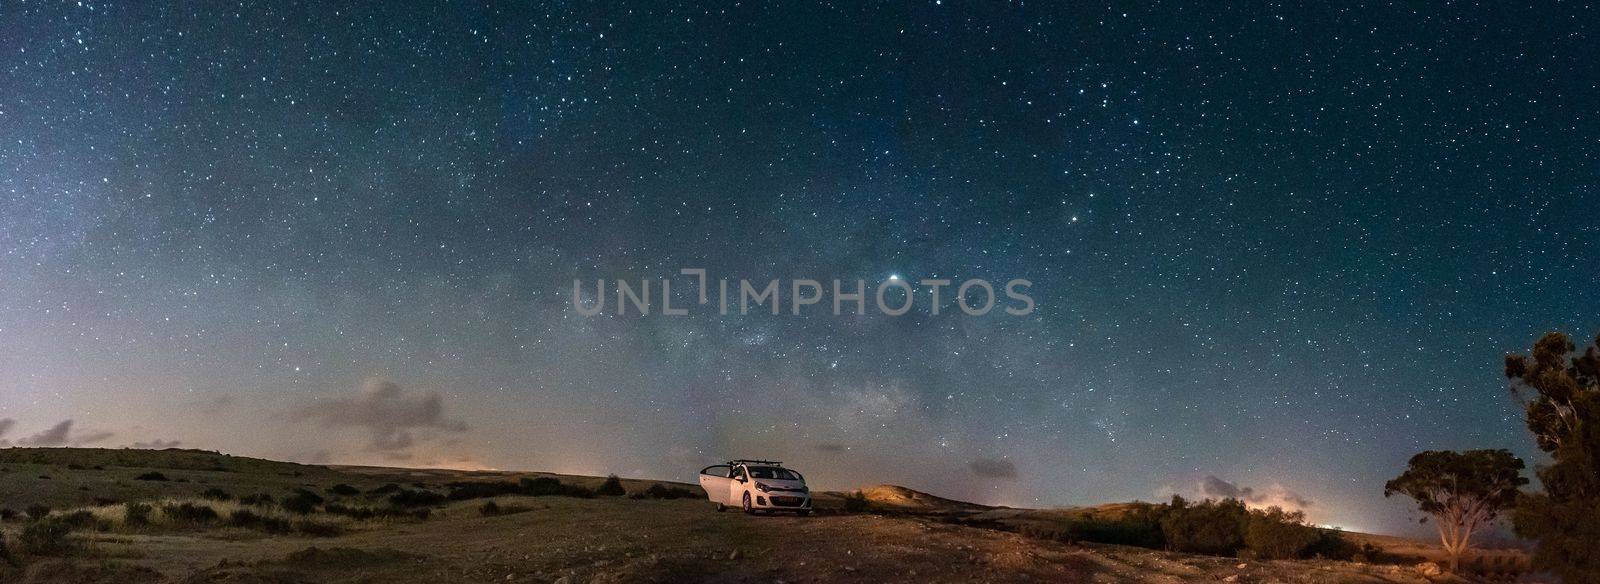 Milky way Panorama and white car in a park by javax